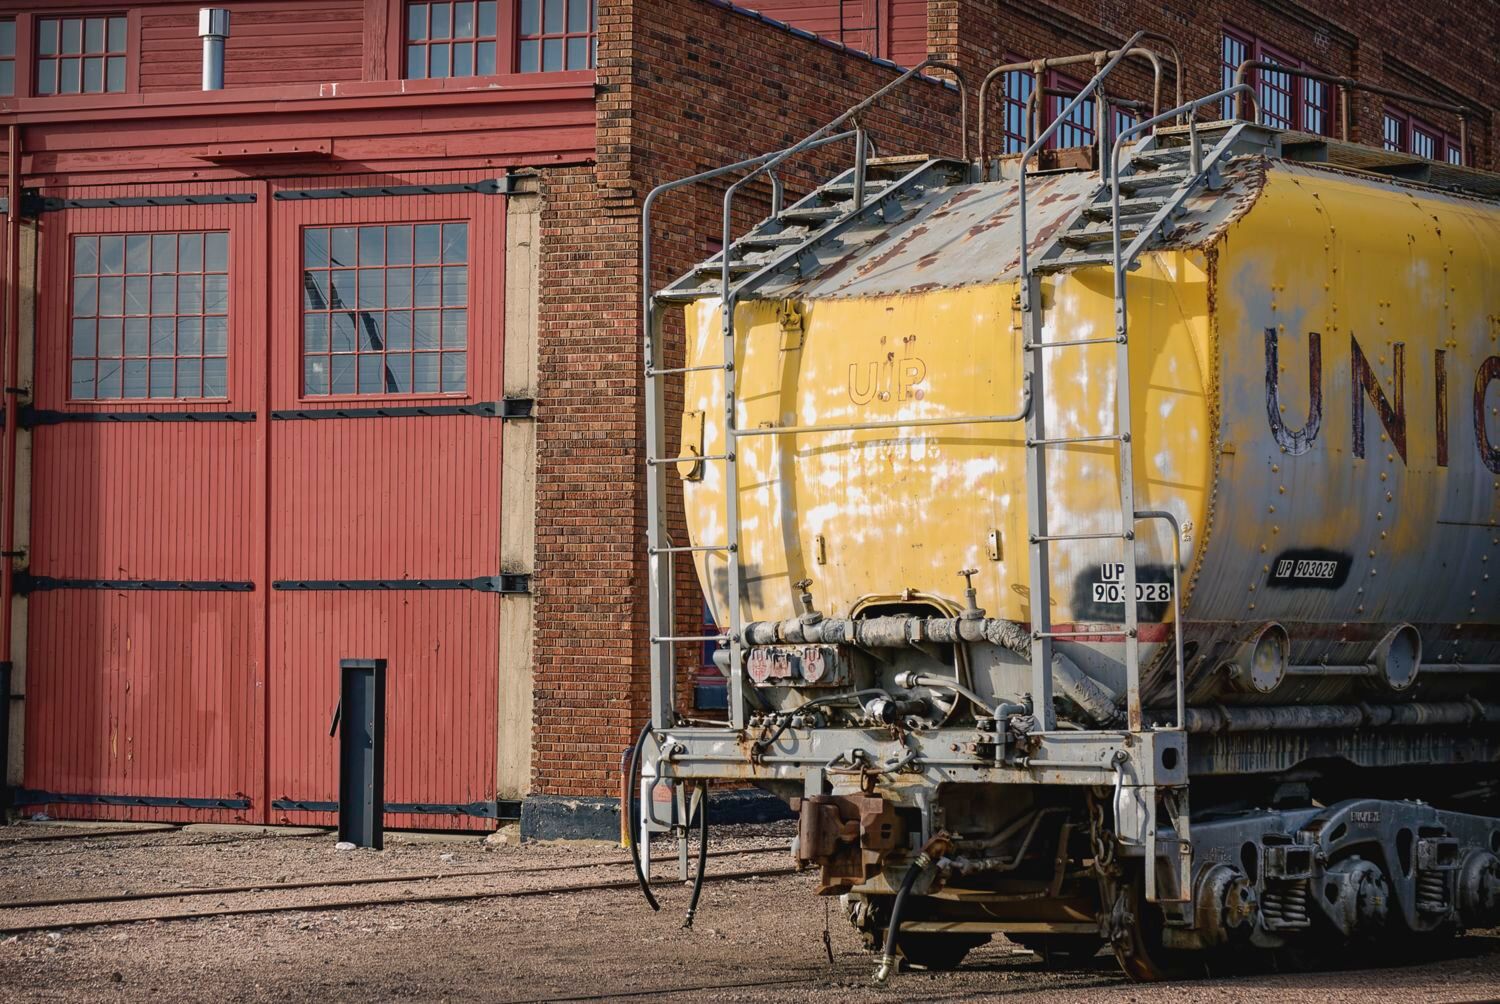 A steam locomotive tender and then a UP turbine tender is parked outside the roundhouse in Cheyenne Wyo.